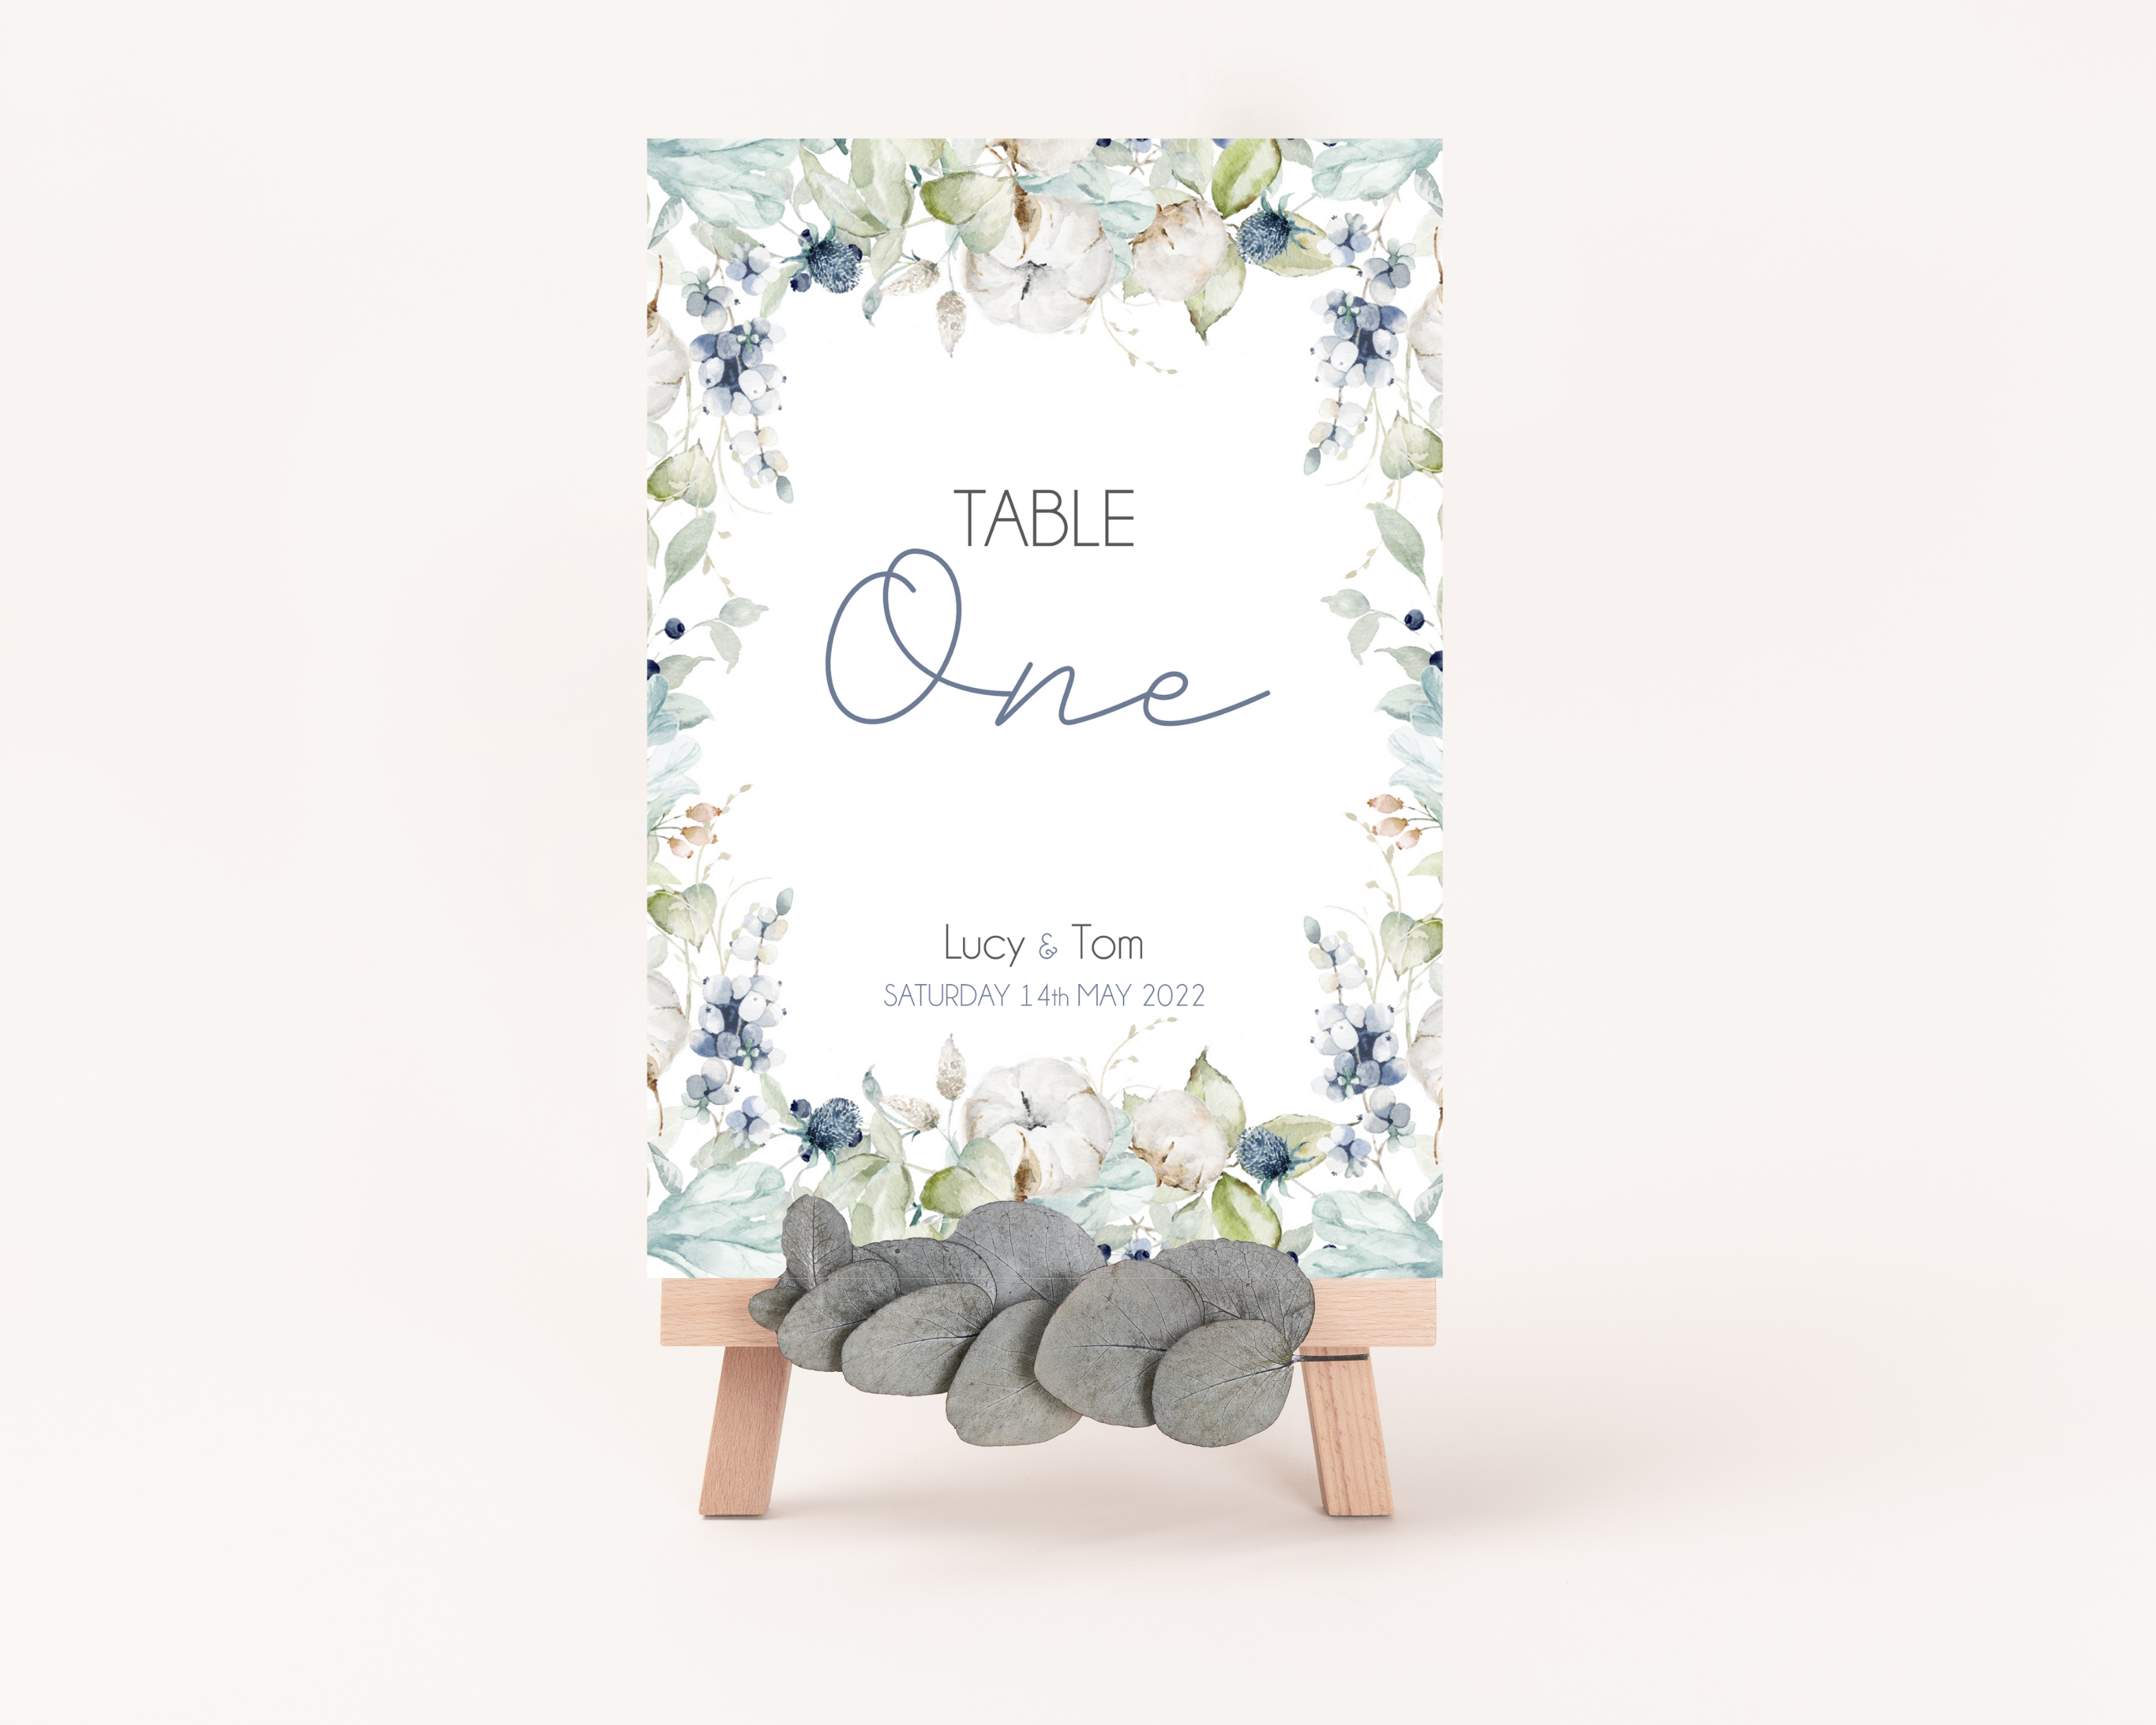 A Poppleberry dusty blue & cotton flowers wedding table number card, for 'Table One' of Lucy & Tom's wedding, in A6 size.